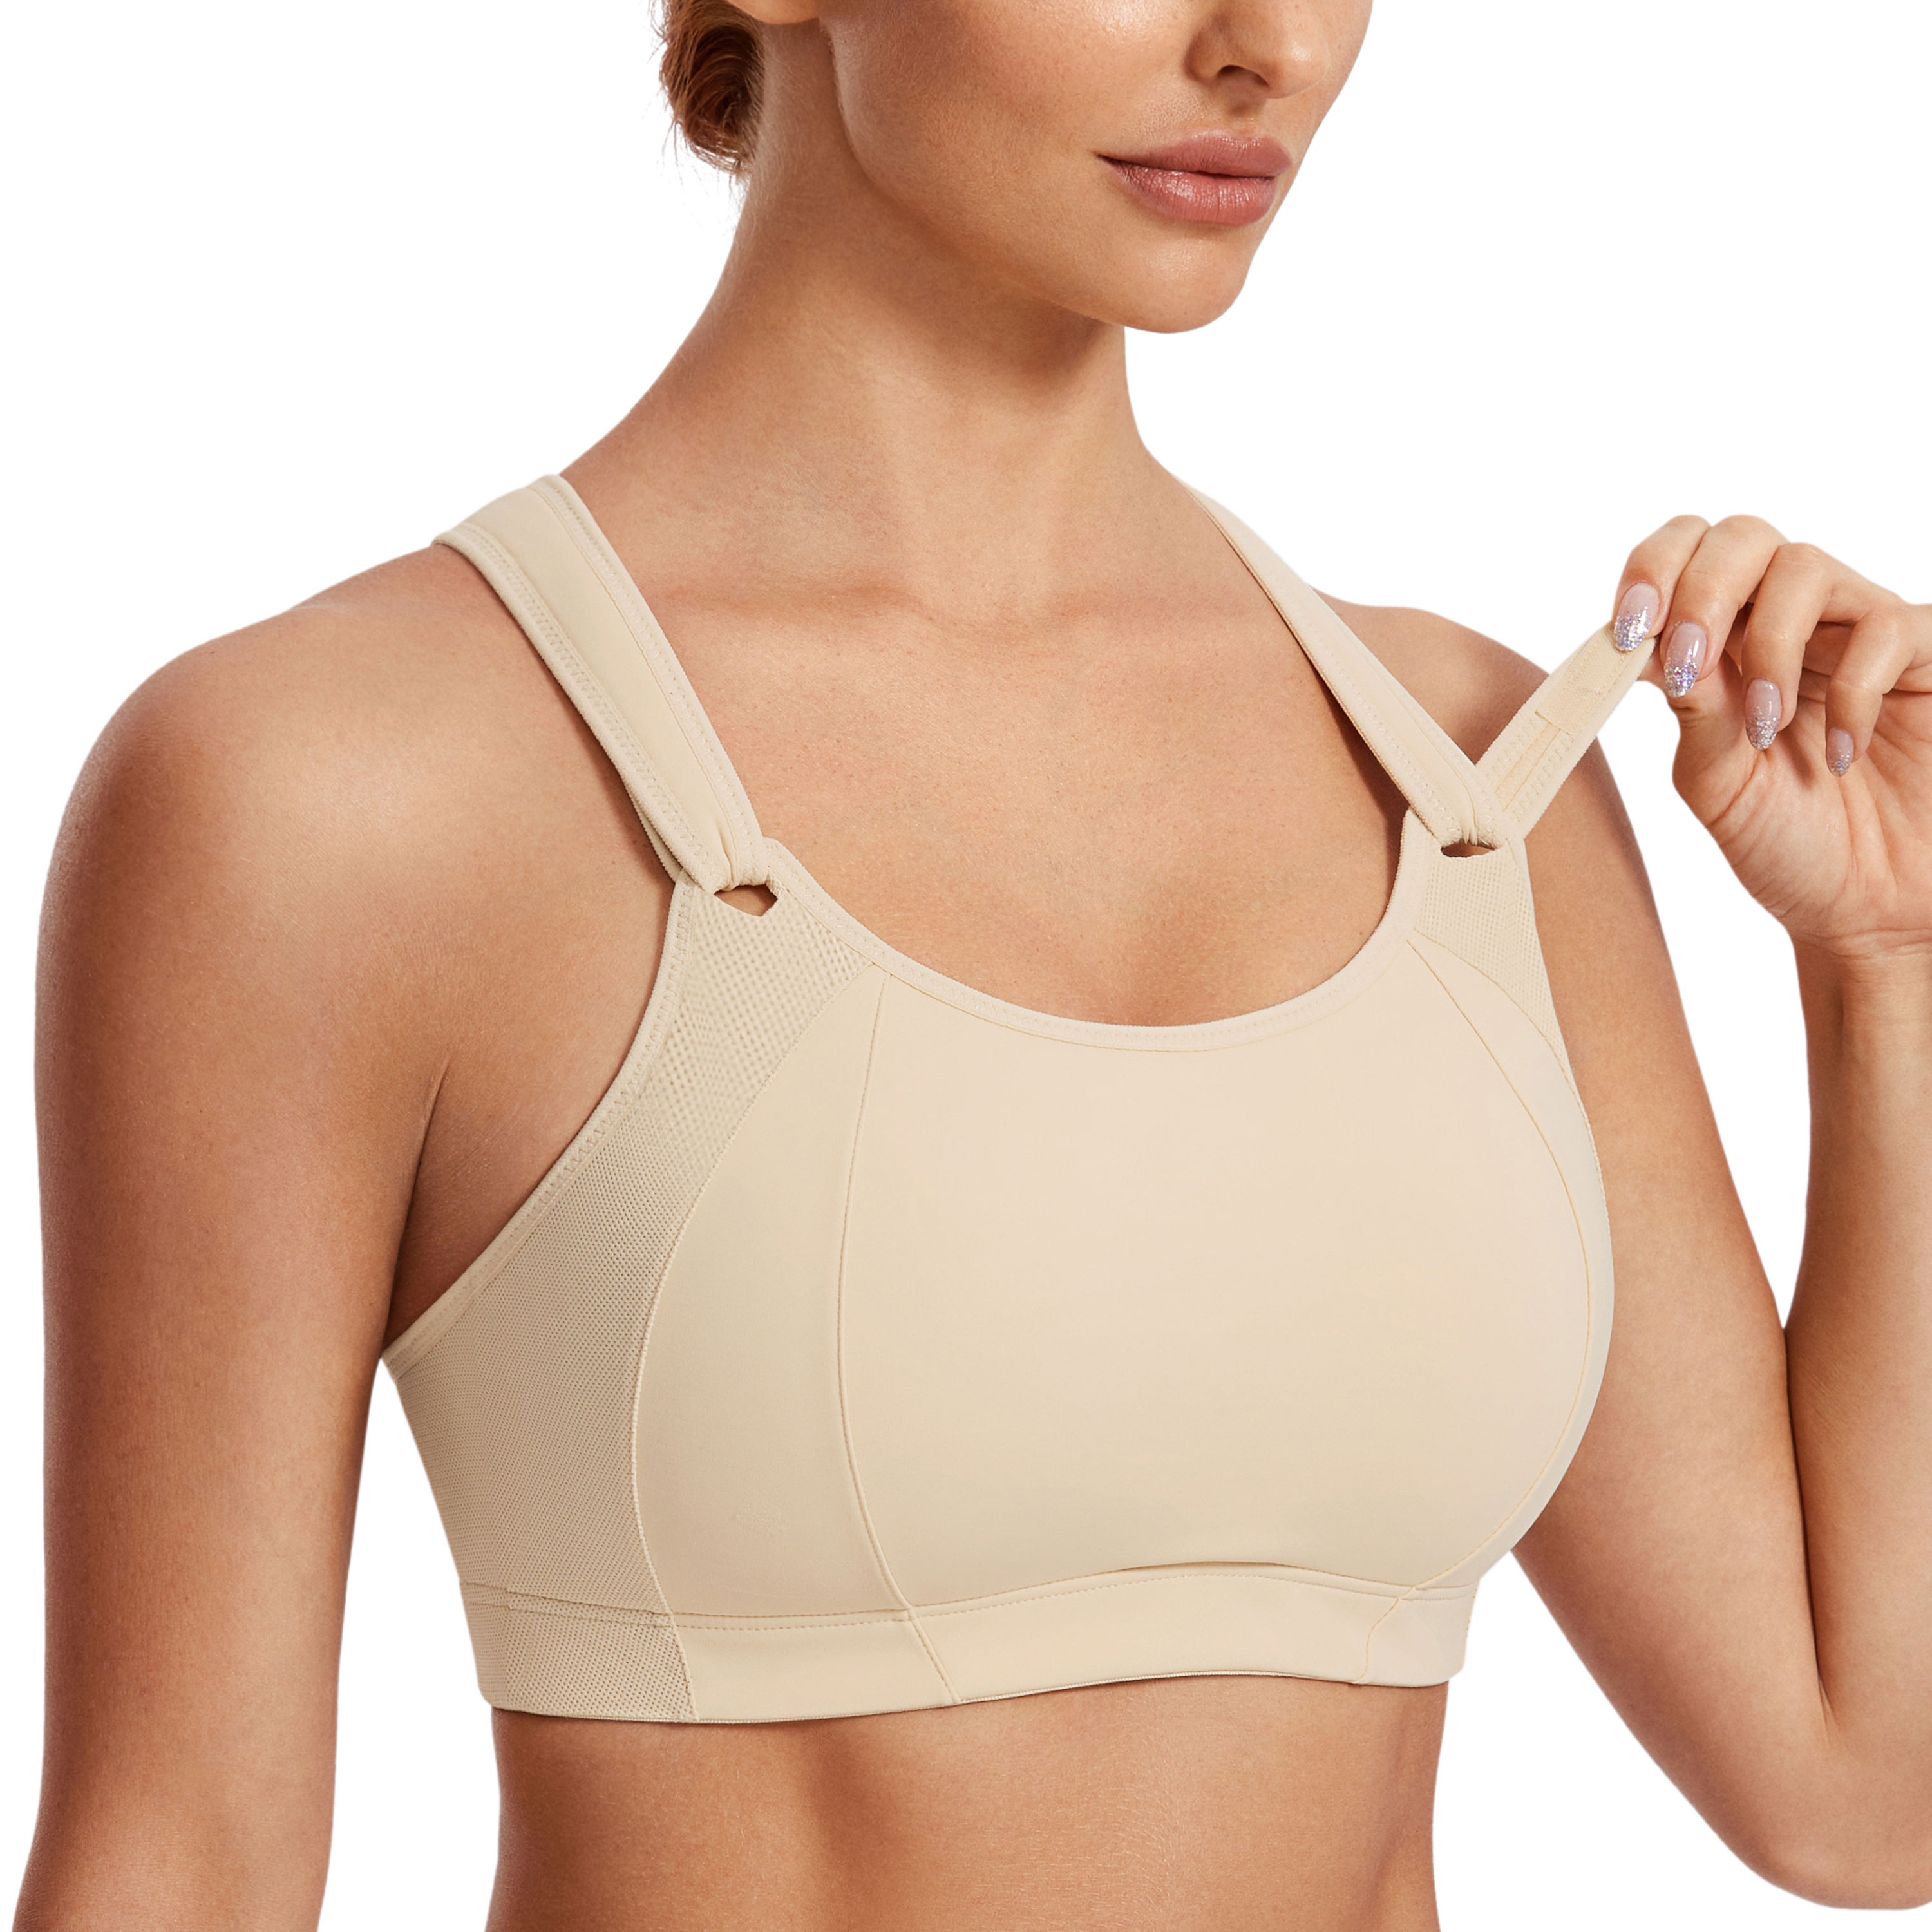 SYROKAN Women's High Impact Support Full Cup Gym Racerback Sports Bra Crop  Top